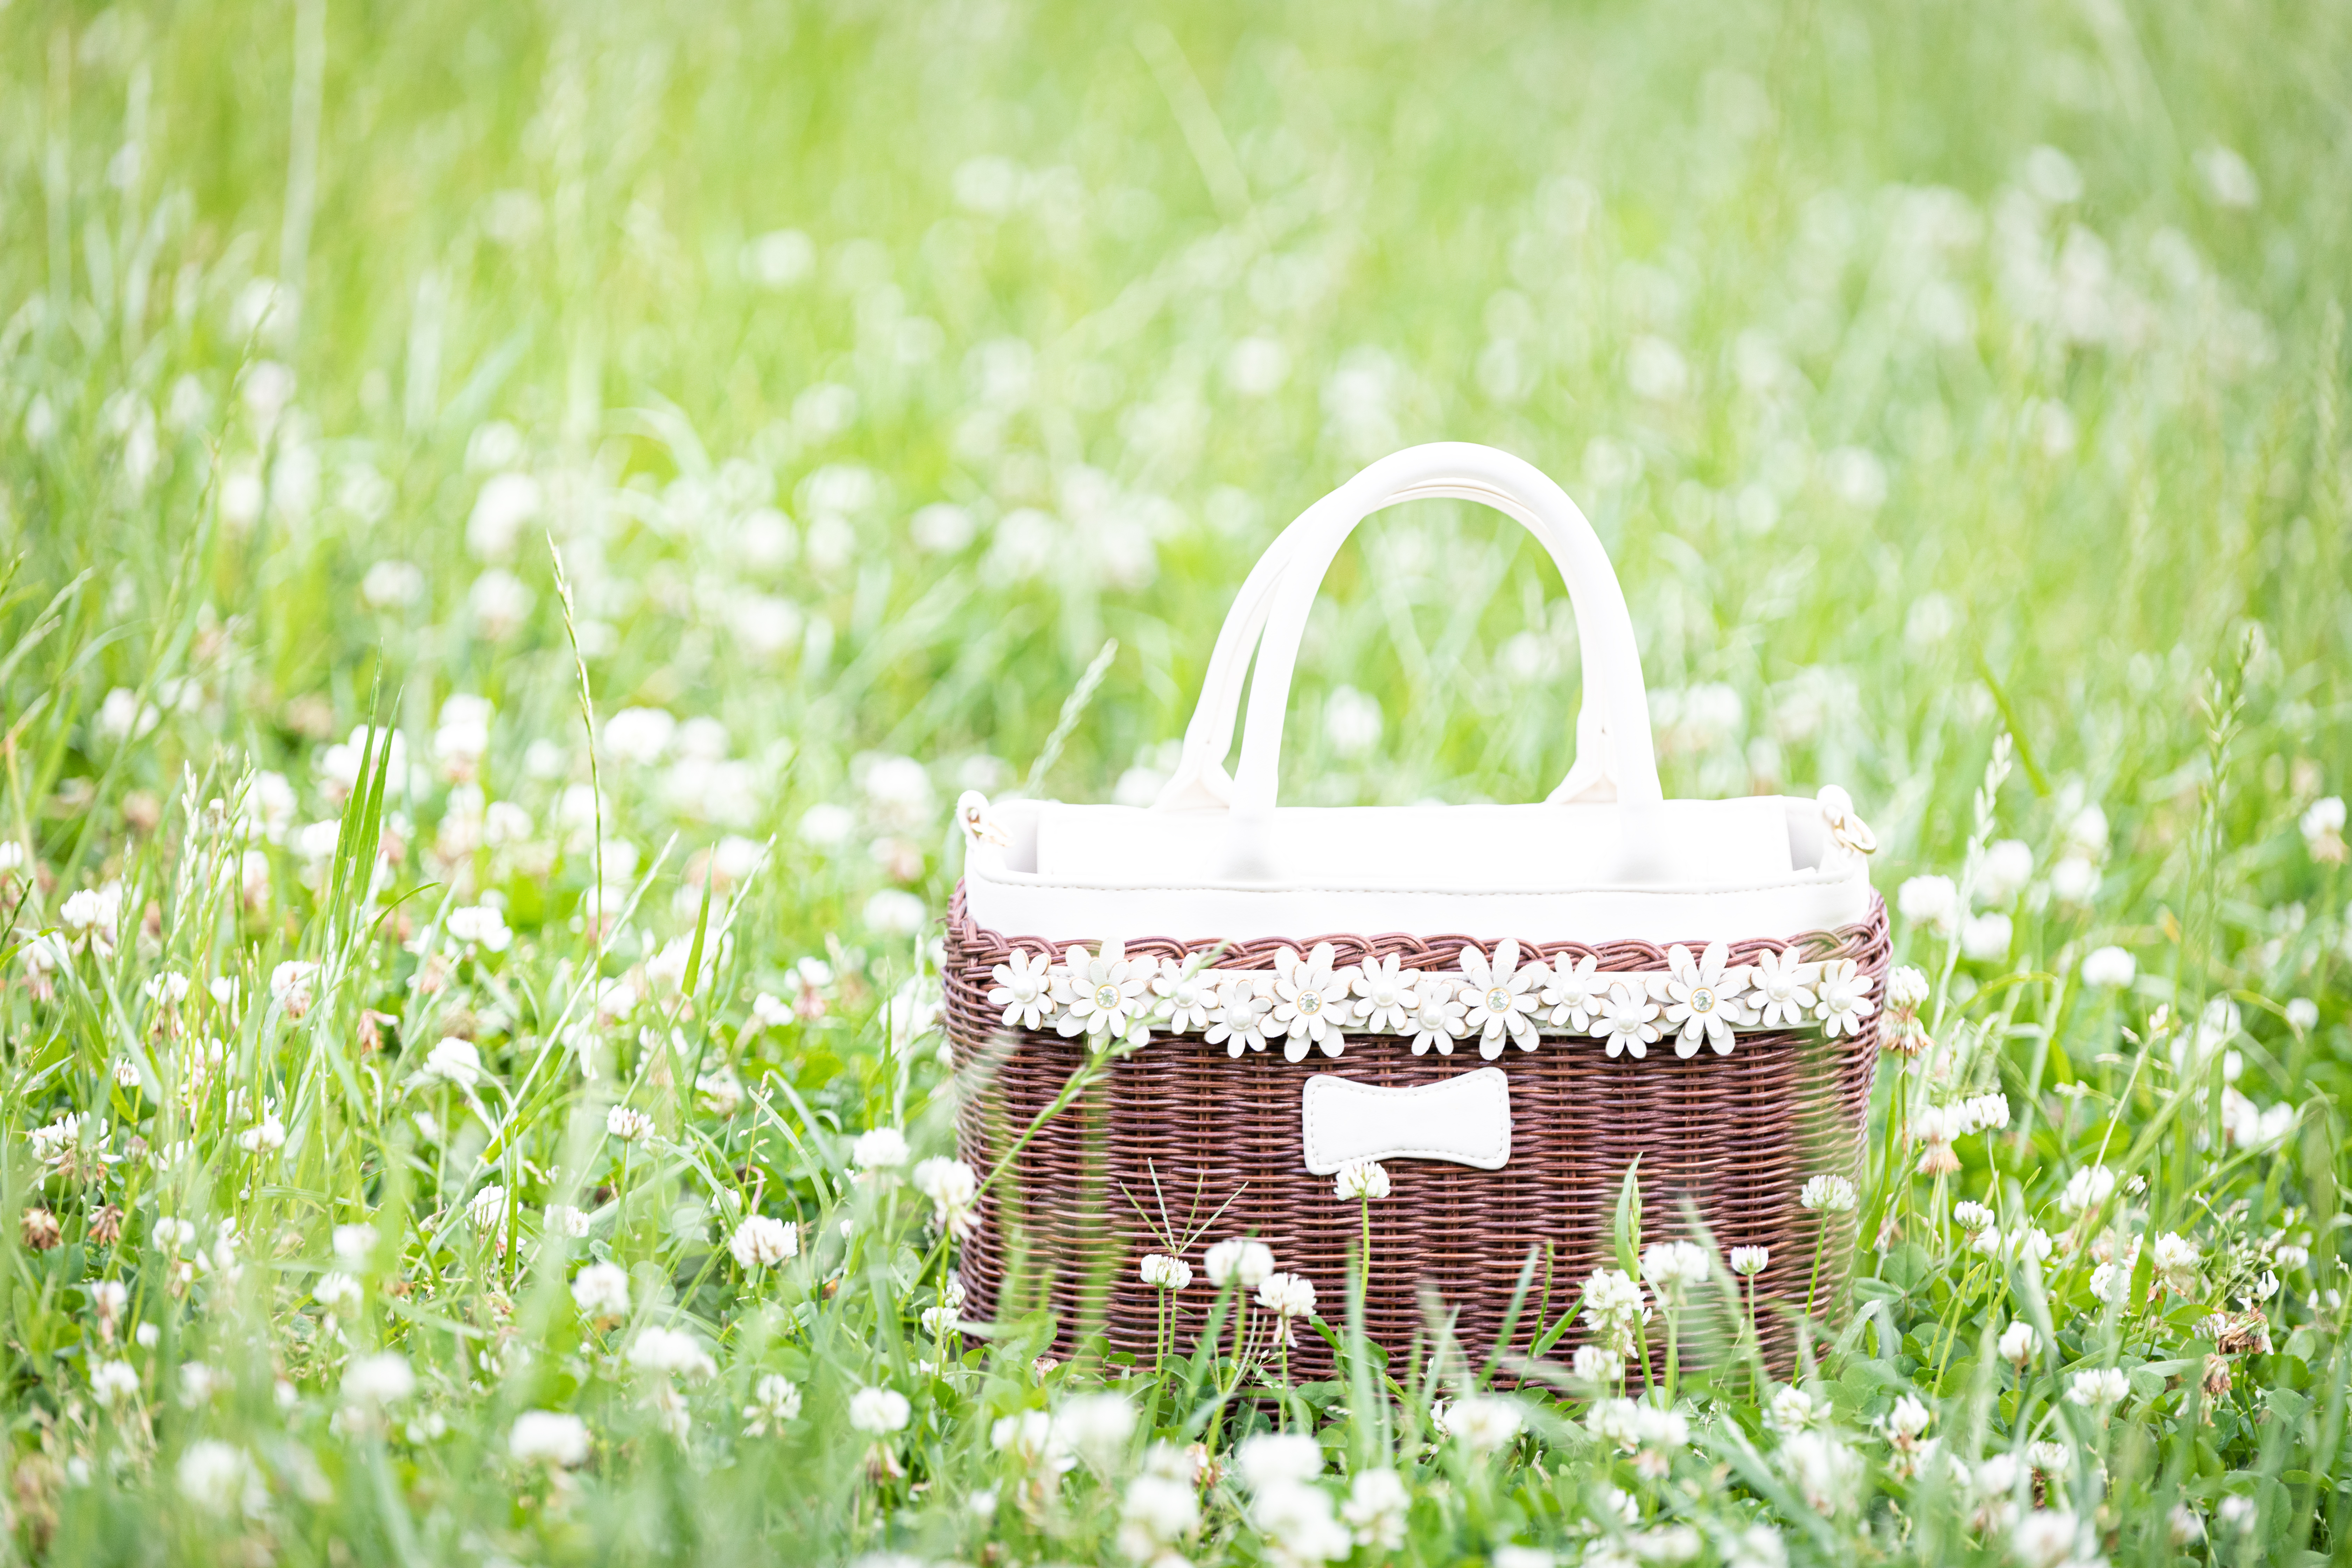 android flowers, grass, miscellanea, miscellaneous, field, basket, polyana, glade